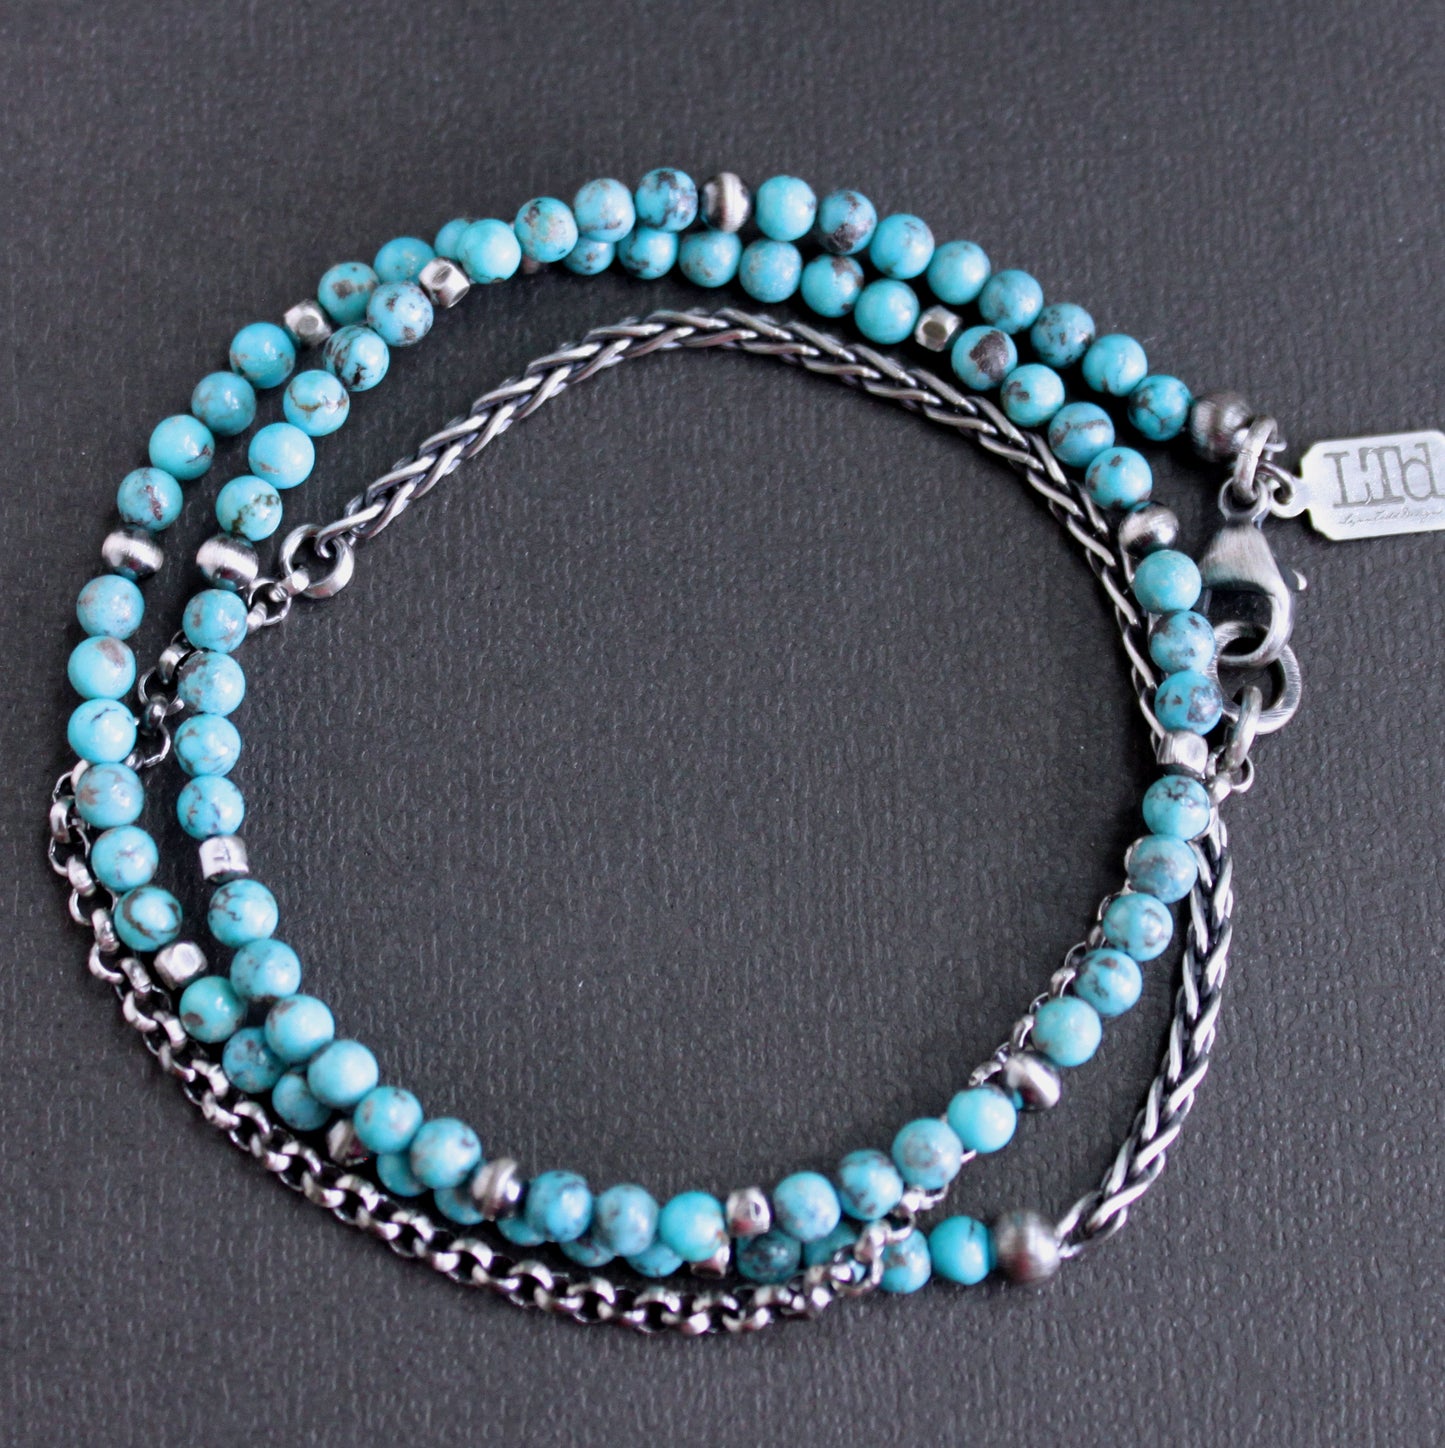 Turquoise Bead Chain Necklace